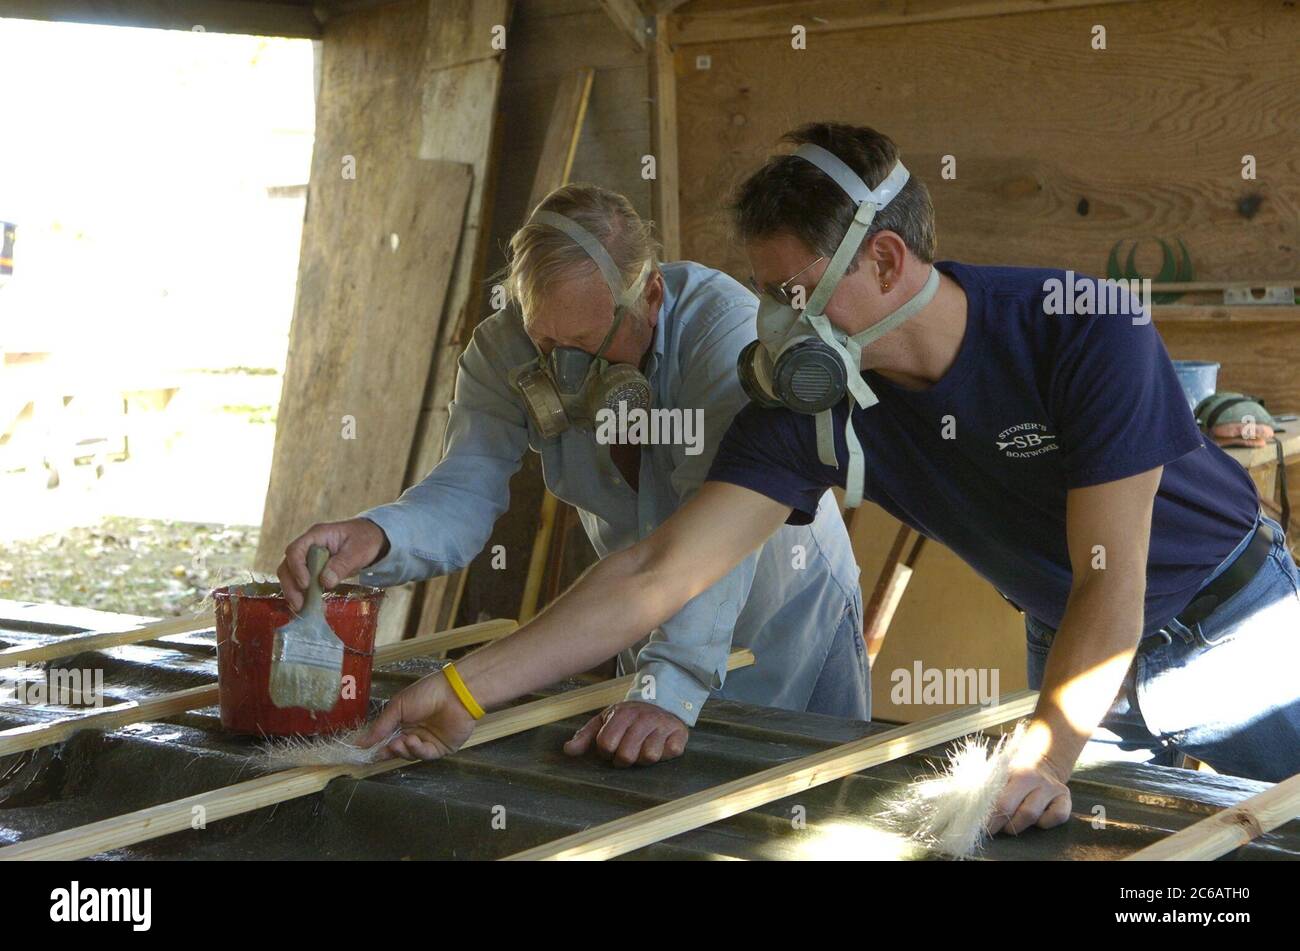 Flour Bluff Texas USA, December 7 2004: Stoner Boat Works, where veteran boat builder Robert Stoner and son Adam work on another custom hull. The Stoners are making a fiberglass mold for a boat.  ©Bob Daemmrich Stock Photo